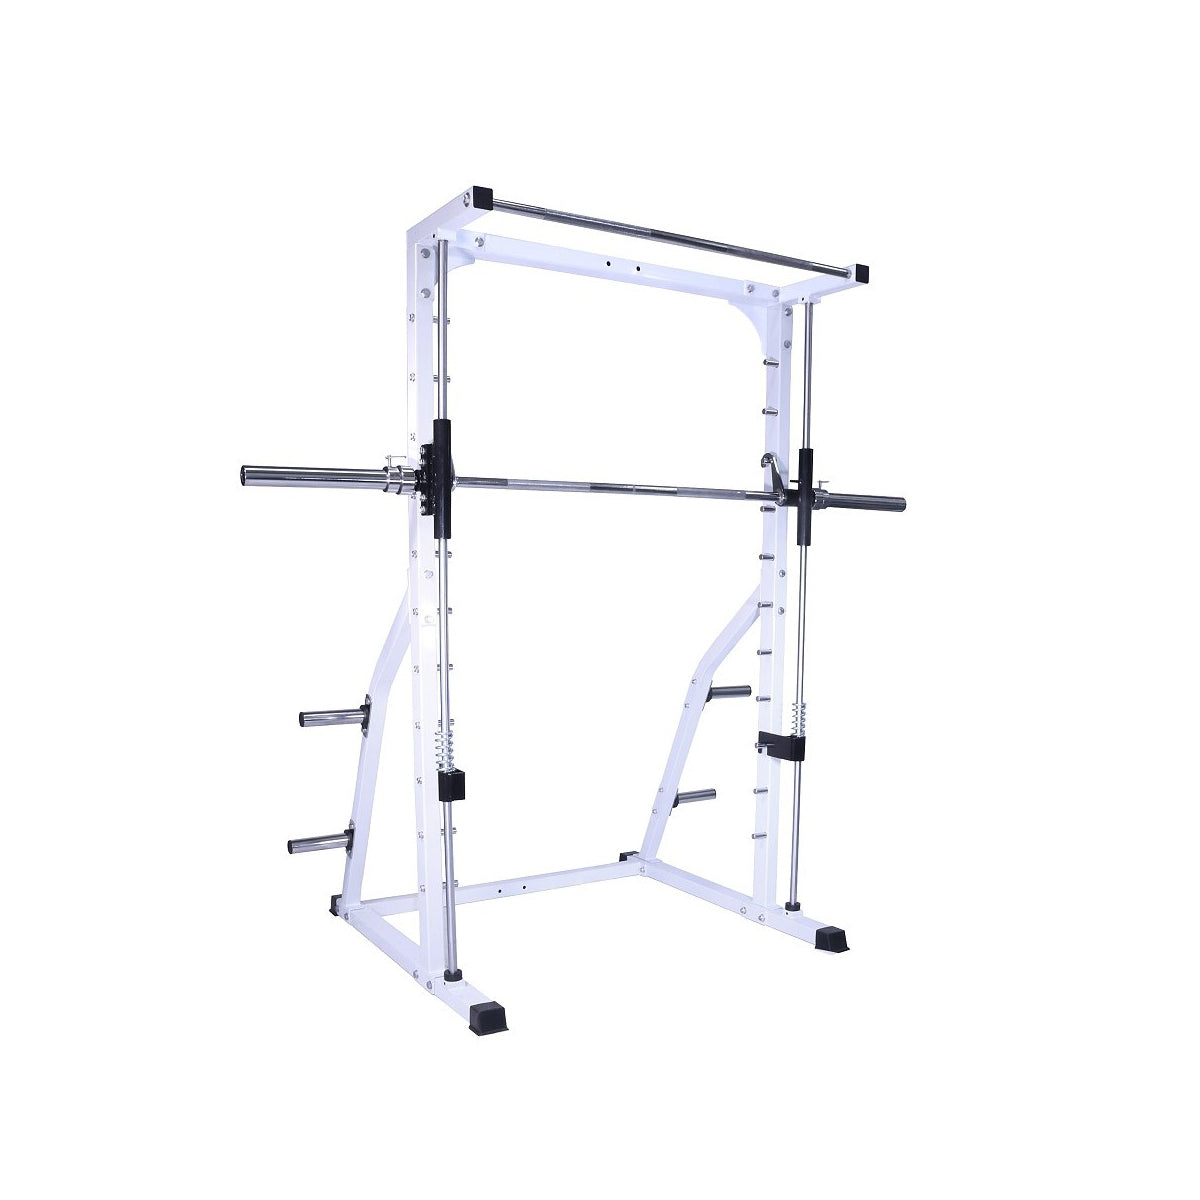 Linear Bearing Smith Machine by Deltech Fitness